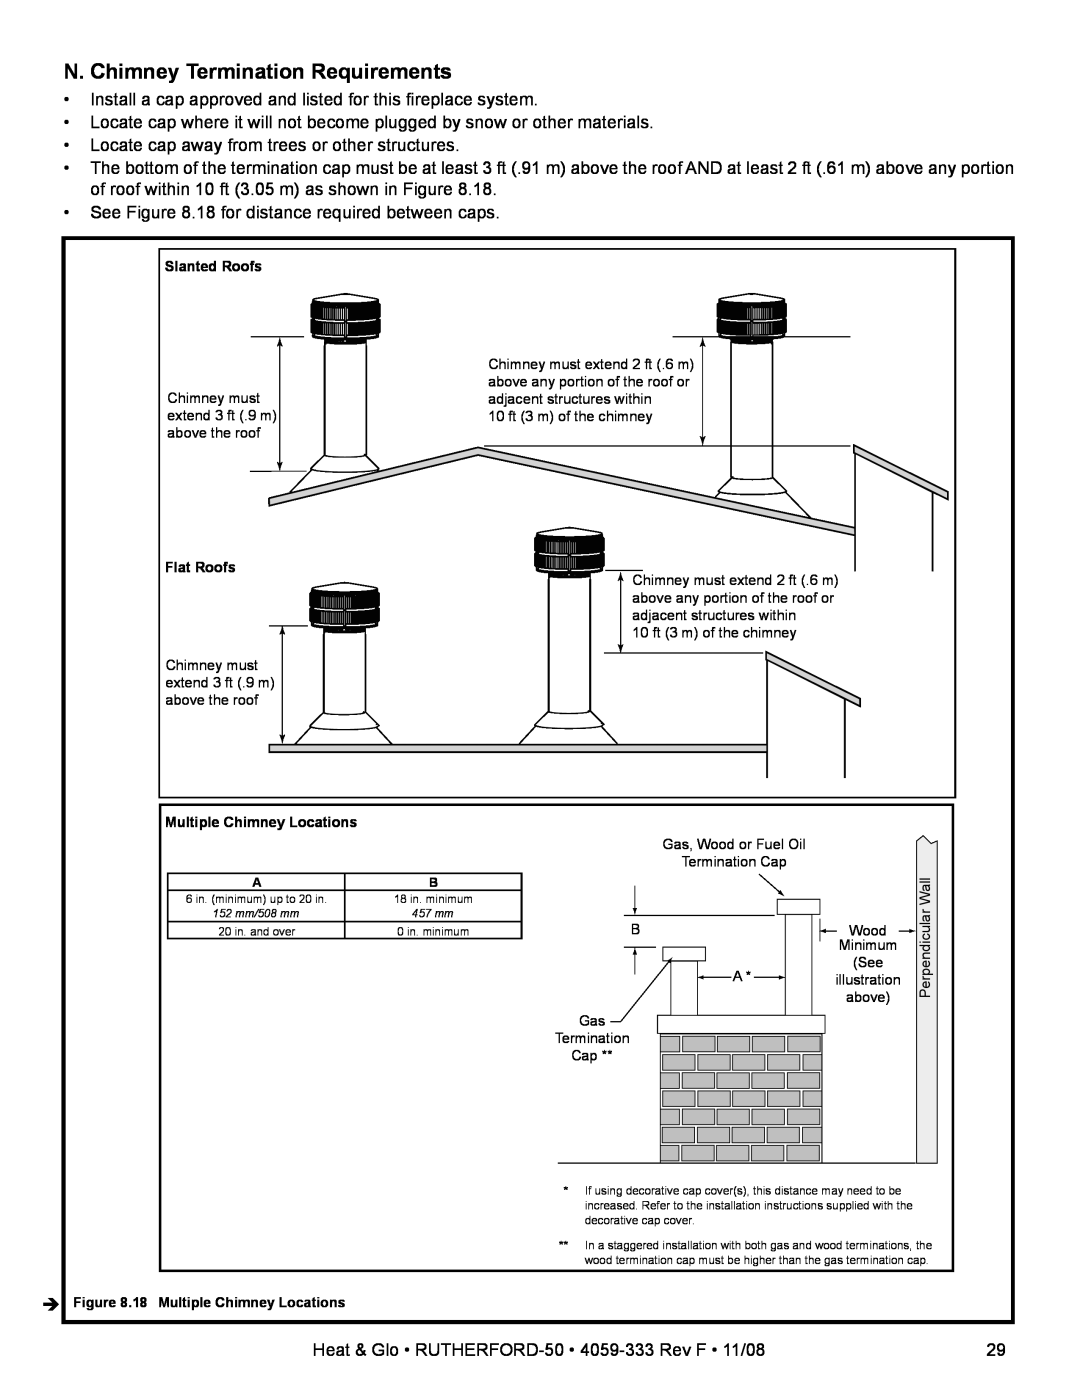 Hearth and Home Technologies RUTHERFORD-50 owner manual N. Chimney Termination Requirements, Multiple Chimney Locations 